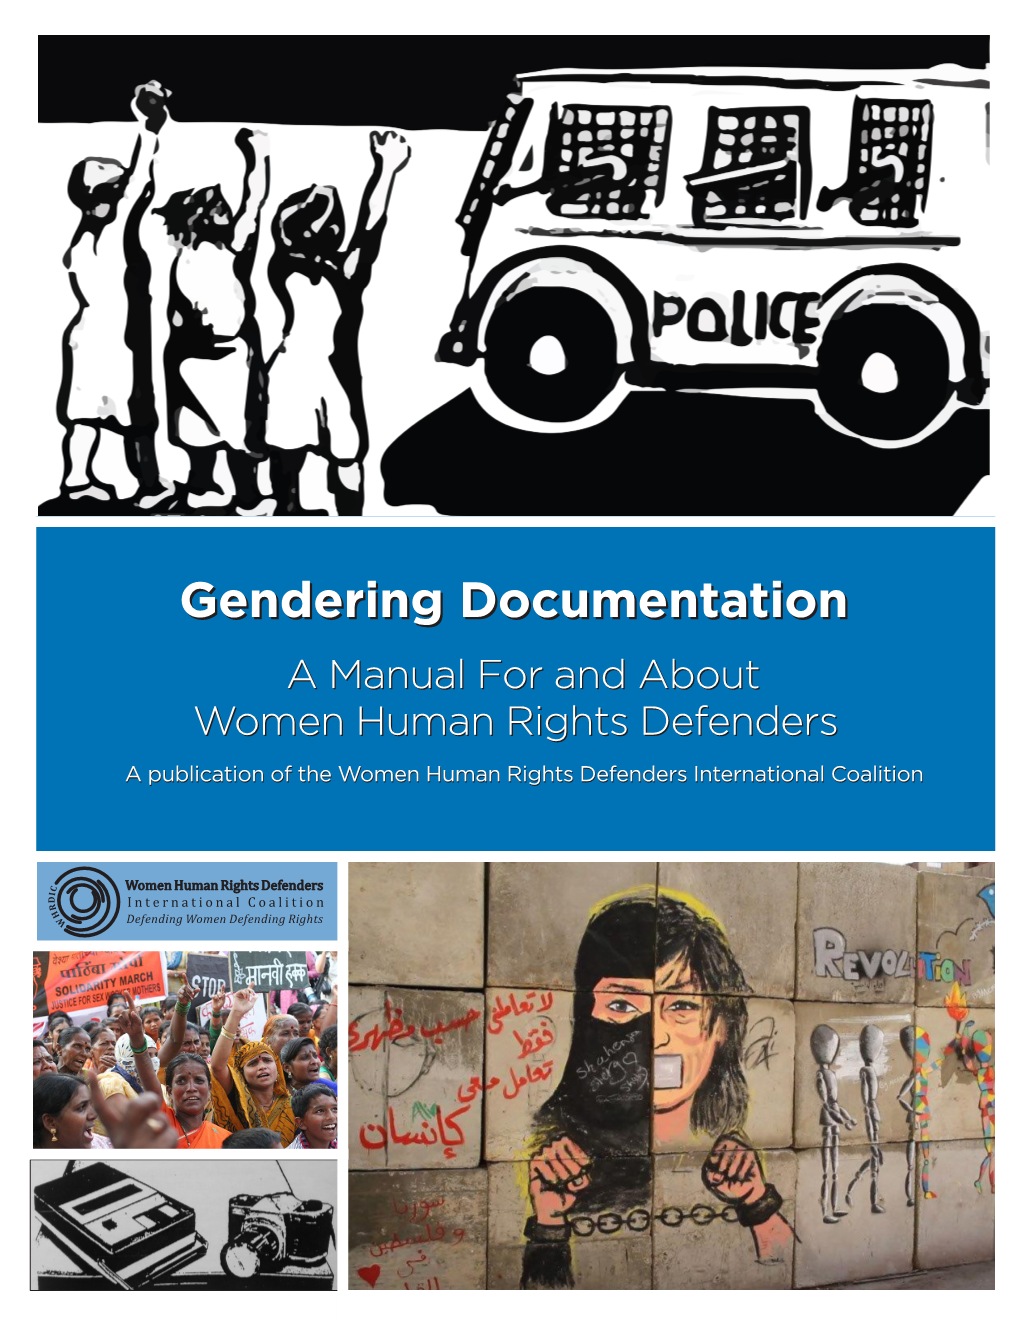 A Manual for and About Women Human Rights Defenders